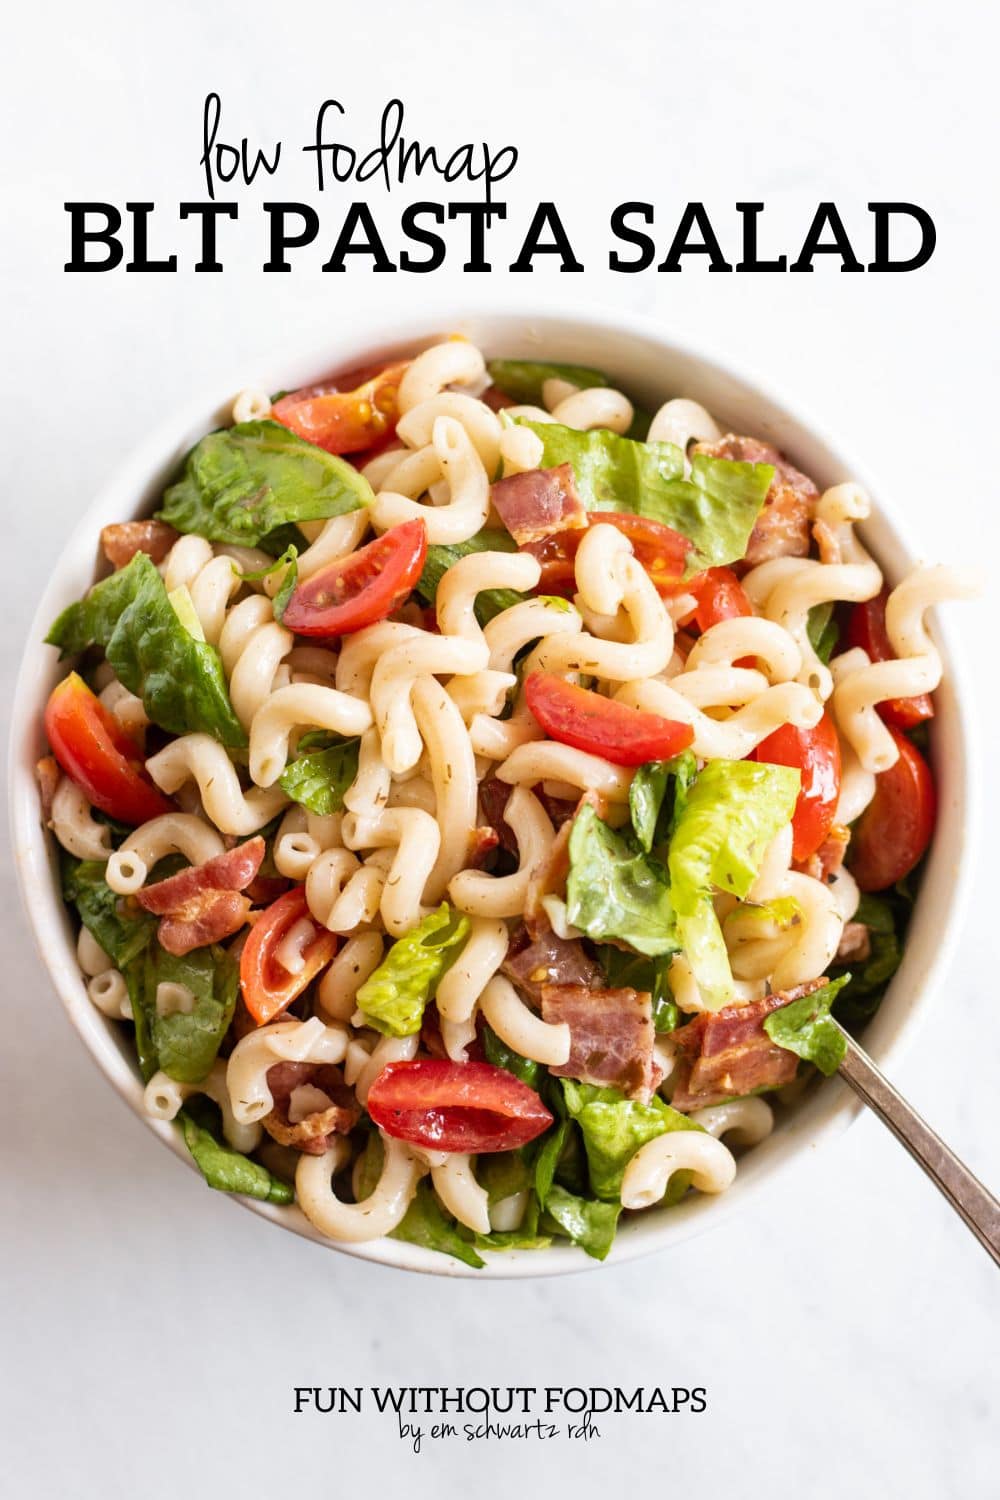 A bowl of cold pasta salad with romaine lettuce, cherry tomatoes, and bacon. In the white space above, black text reads "low FODMAP BLT Pasta Salad".